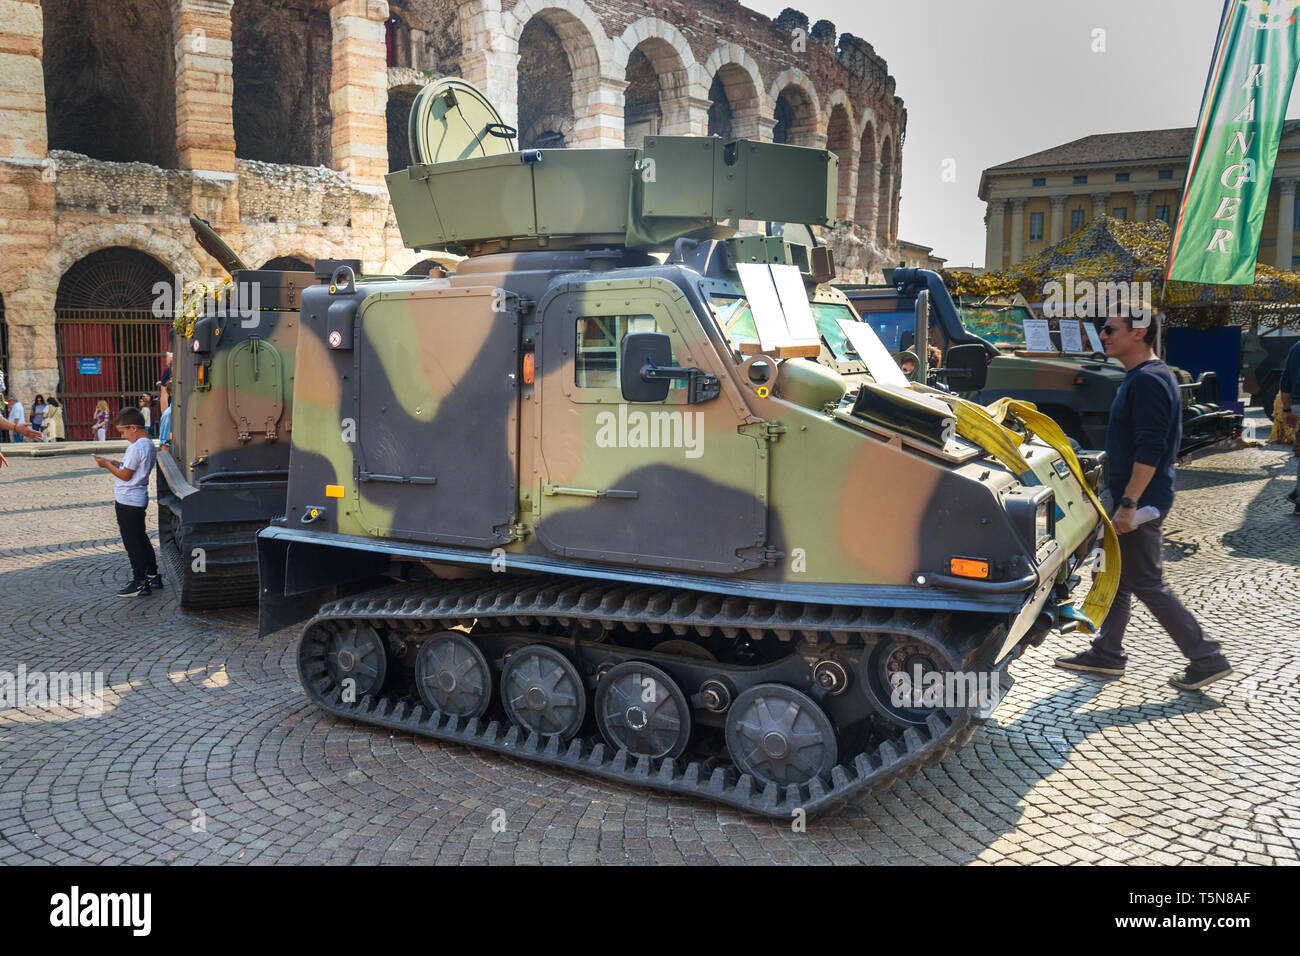 Verona, Italy - October 20, 2018: Bandvagn 206 is tracked articulated, all-terrain carrier developed by Hagglunds at open military exhibition on Piazz Stock Photo